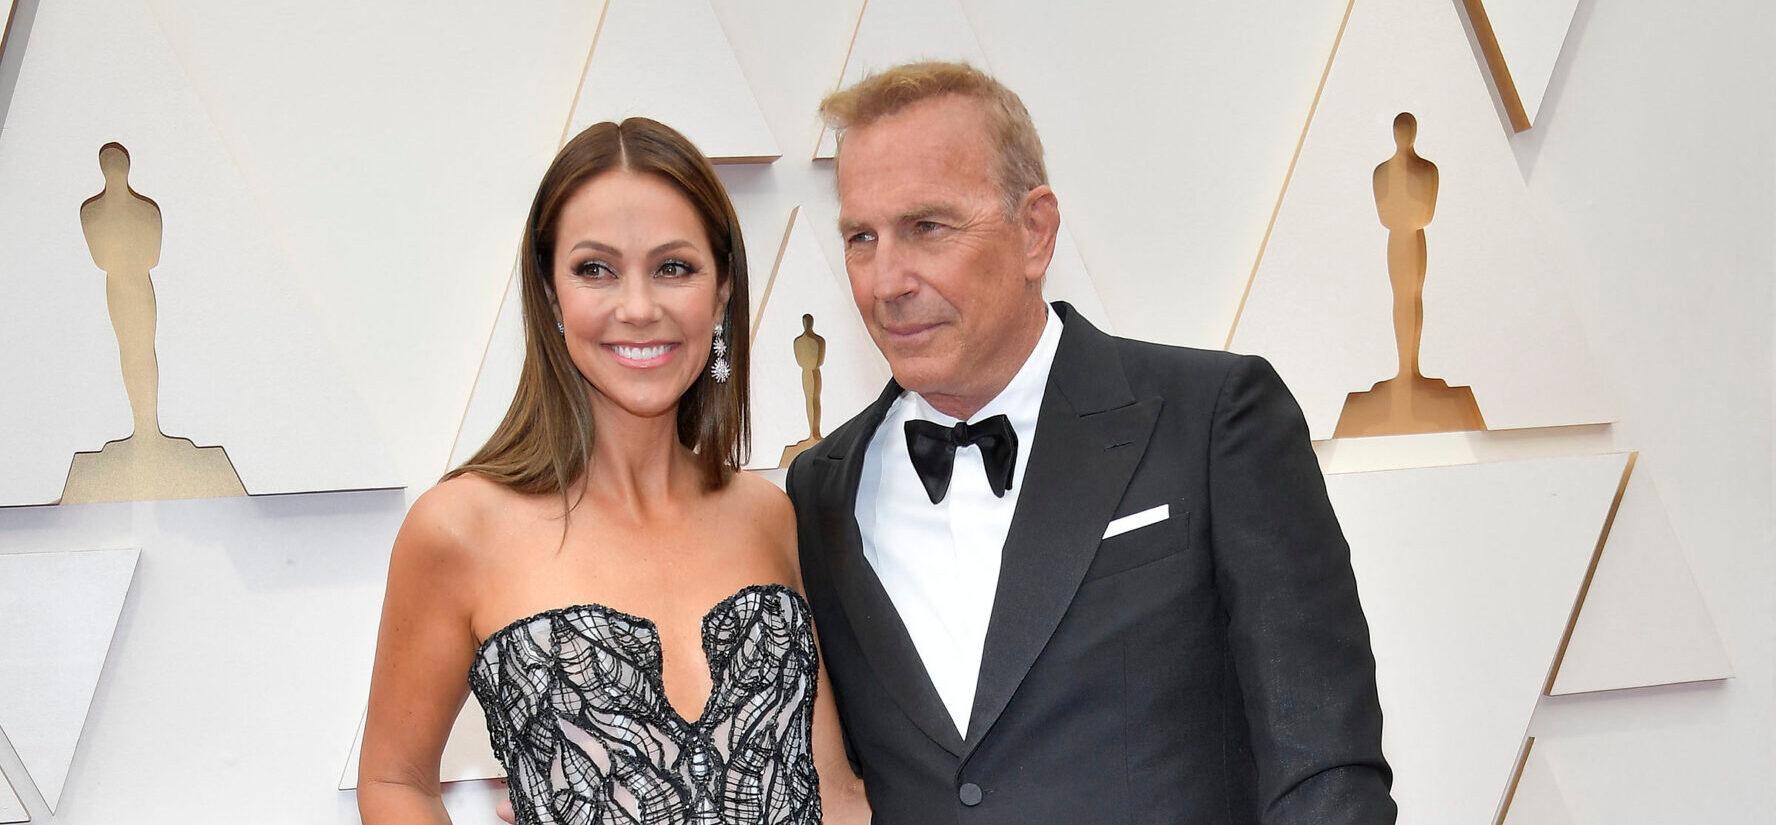 Kevin Costner’s Wife Claims She Did Not Pressure Him To Quit ‘Yellowstone’